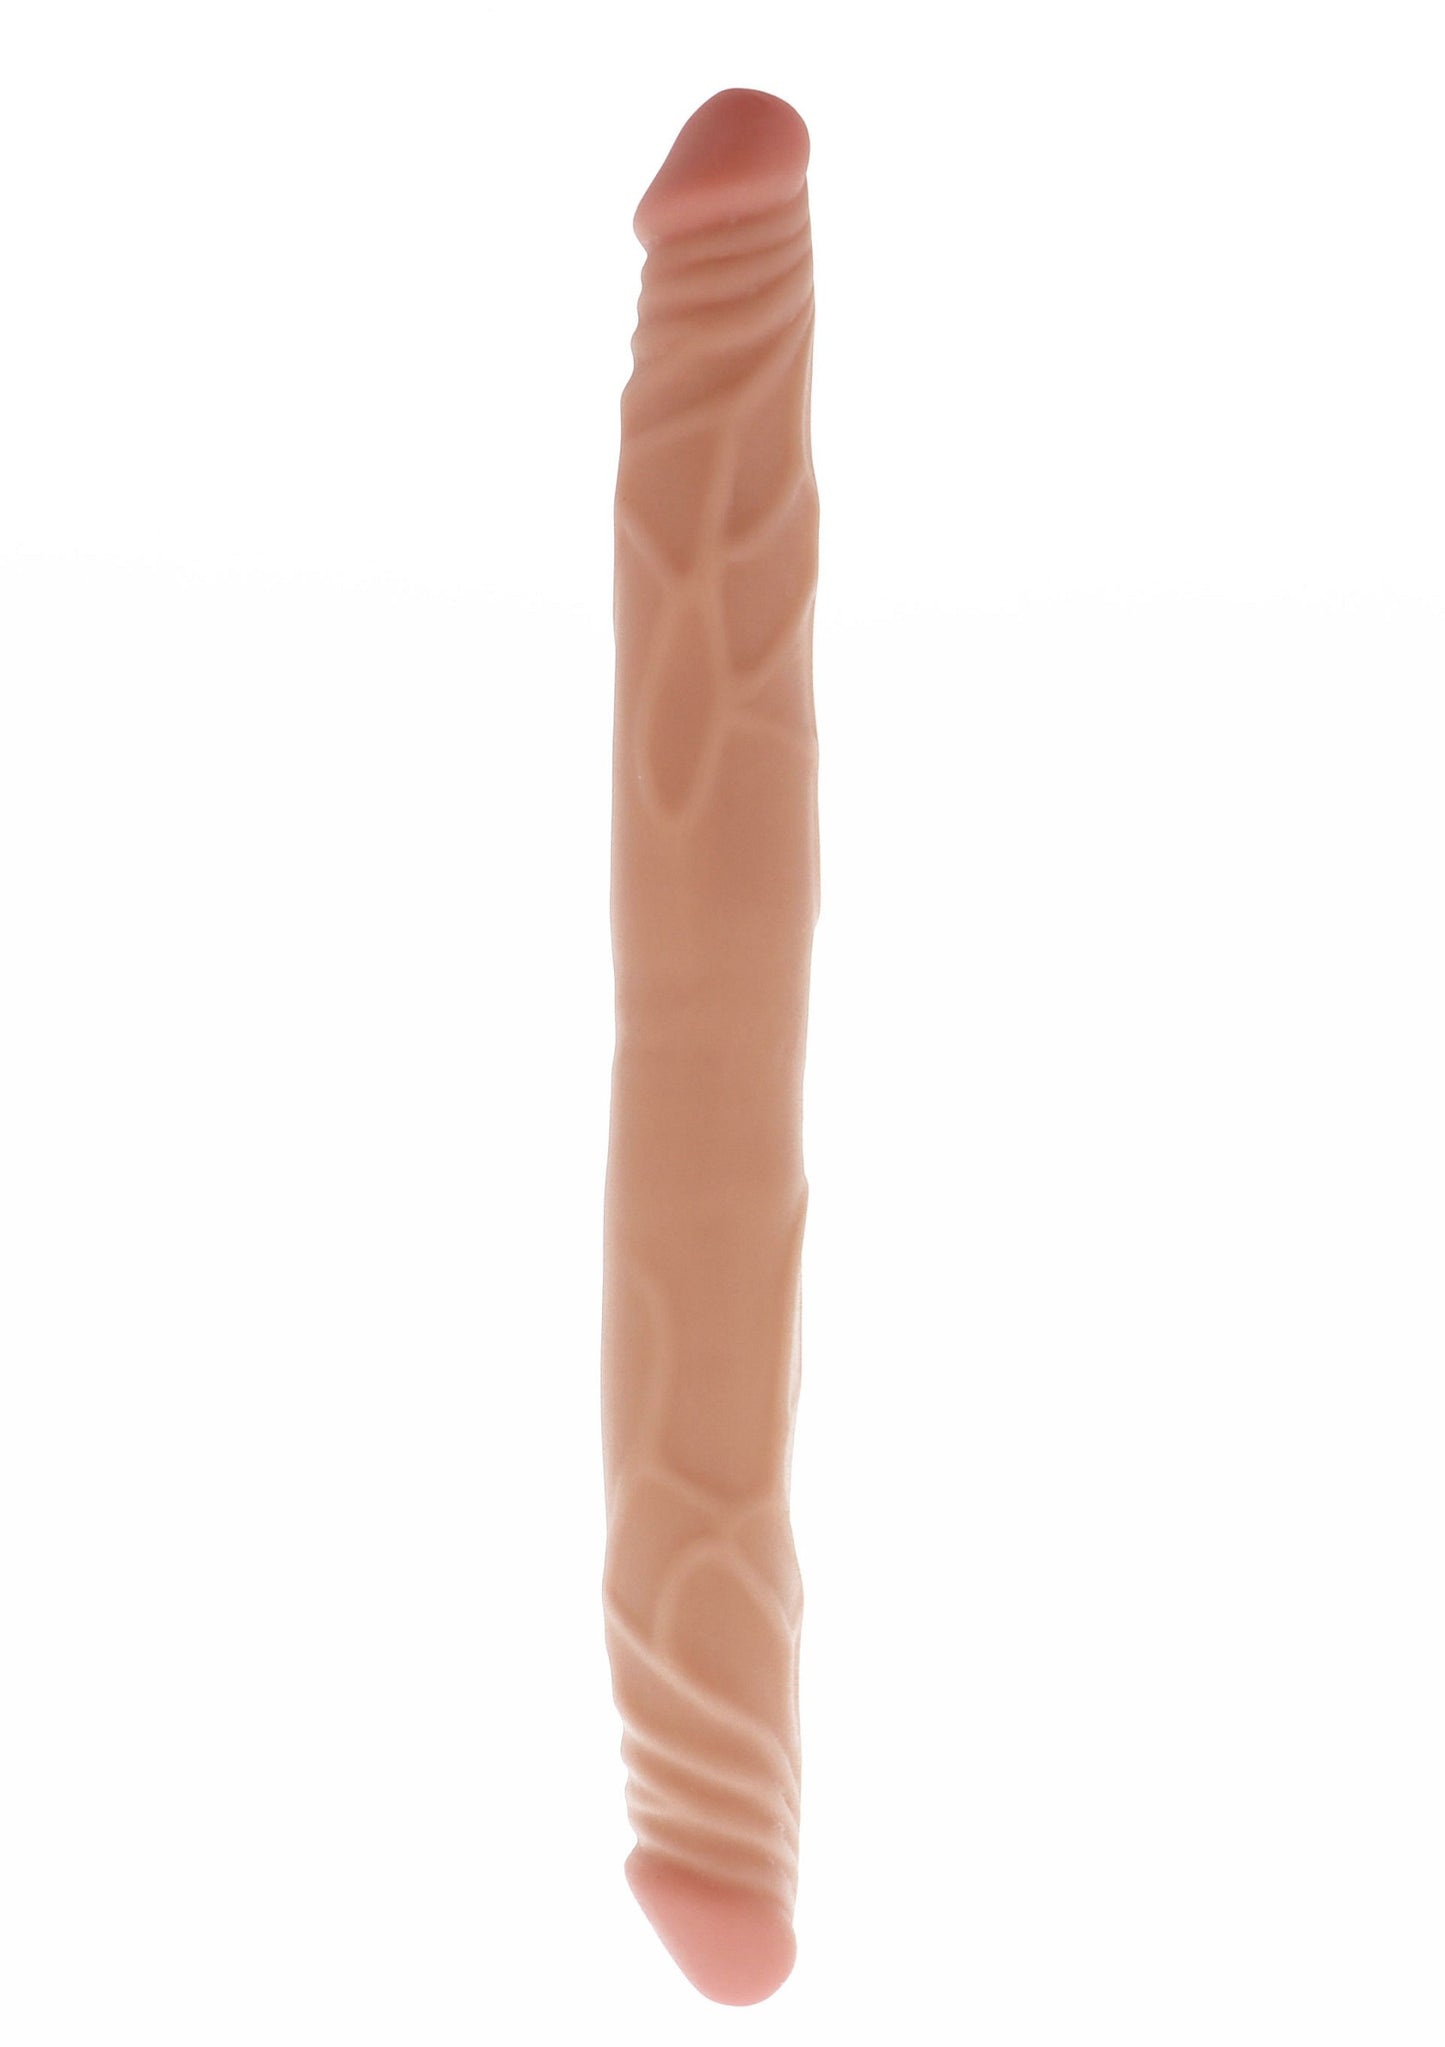 ToyJoy Get Real Double Dong 14' SKIN - 4